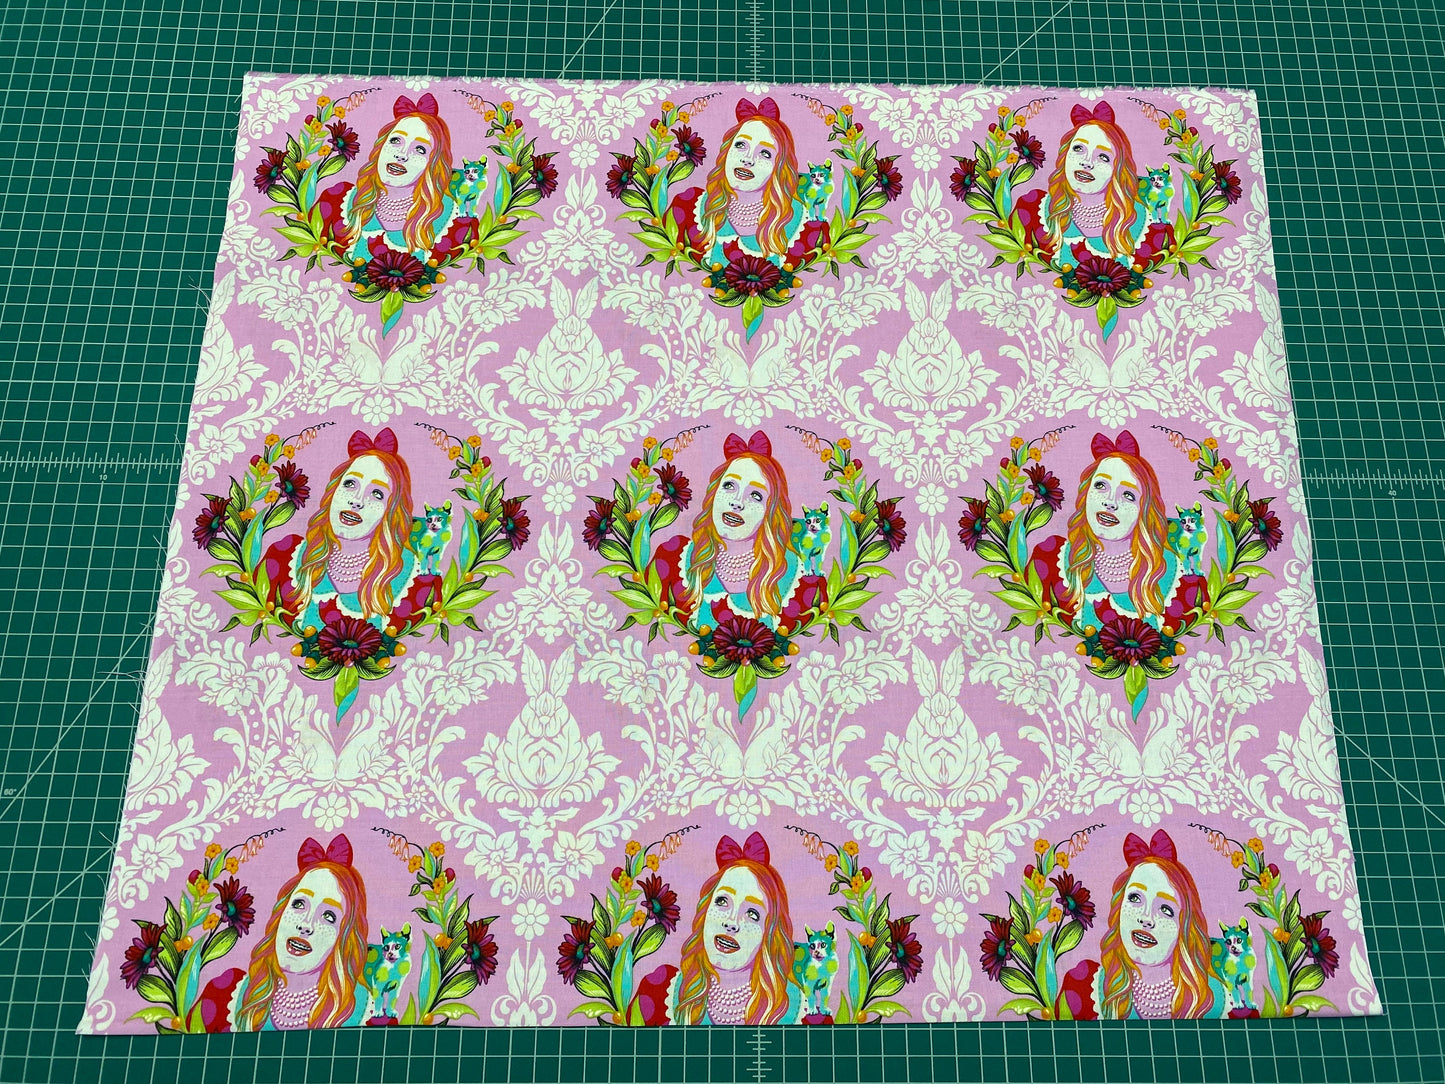 Tula Pink Curiouser & Curiouser Alice Wonder PWTP159.WONDER Cotton Woven Fabric Sold as shown 26" Panel of 3 Rows